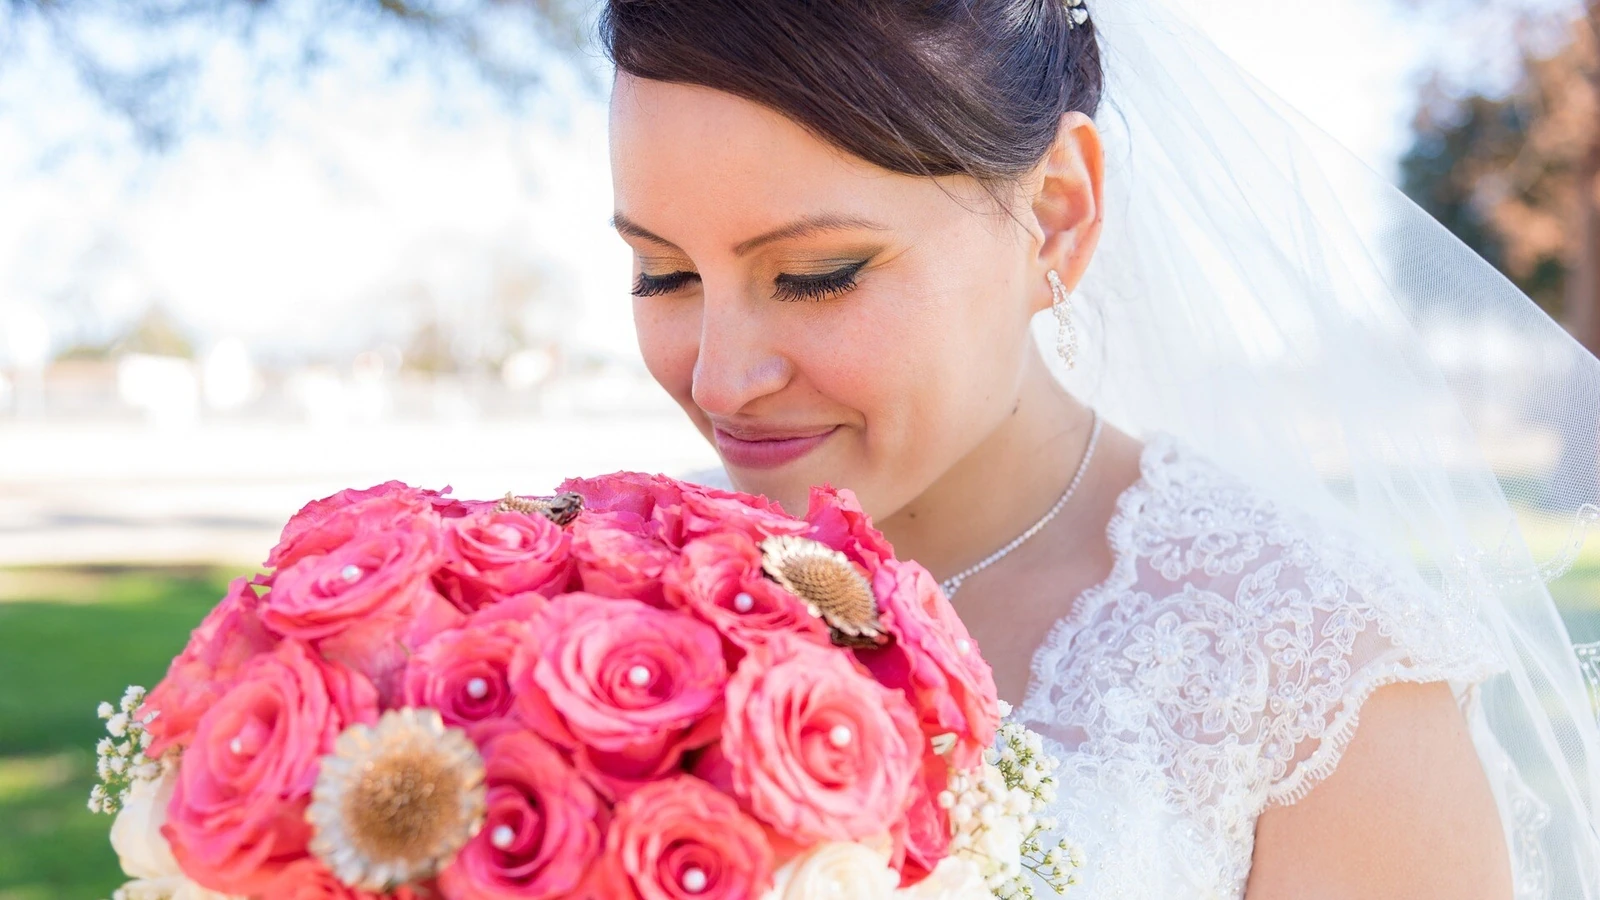 Beauty tips: Skincare routine for your summer wedding